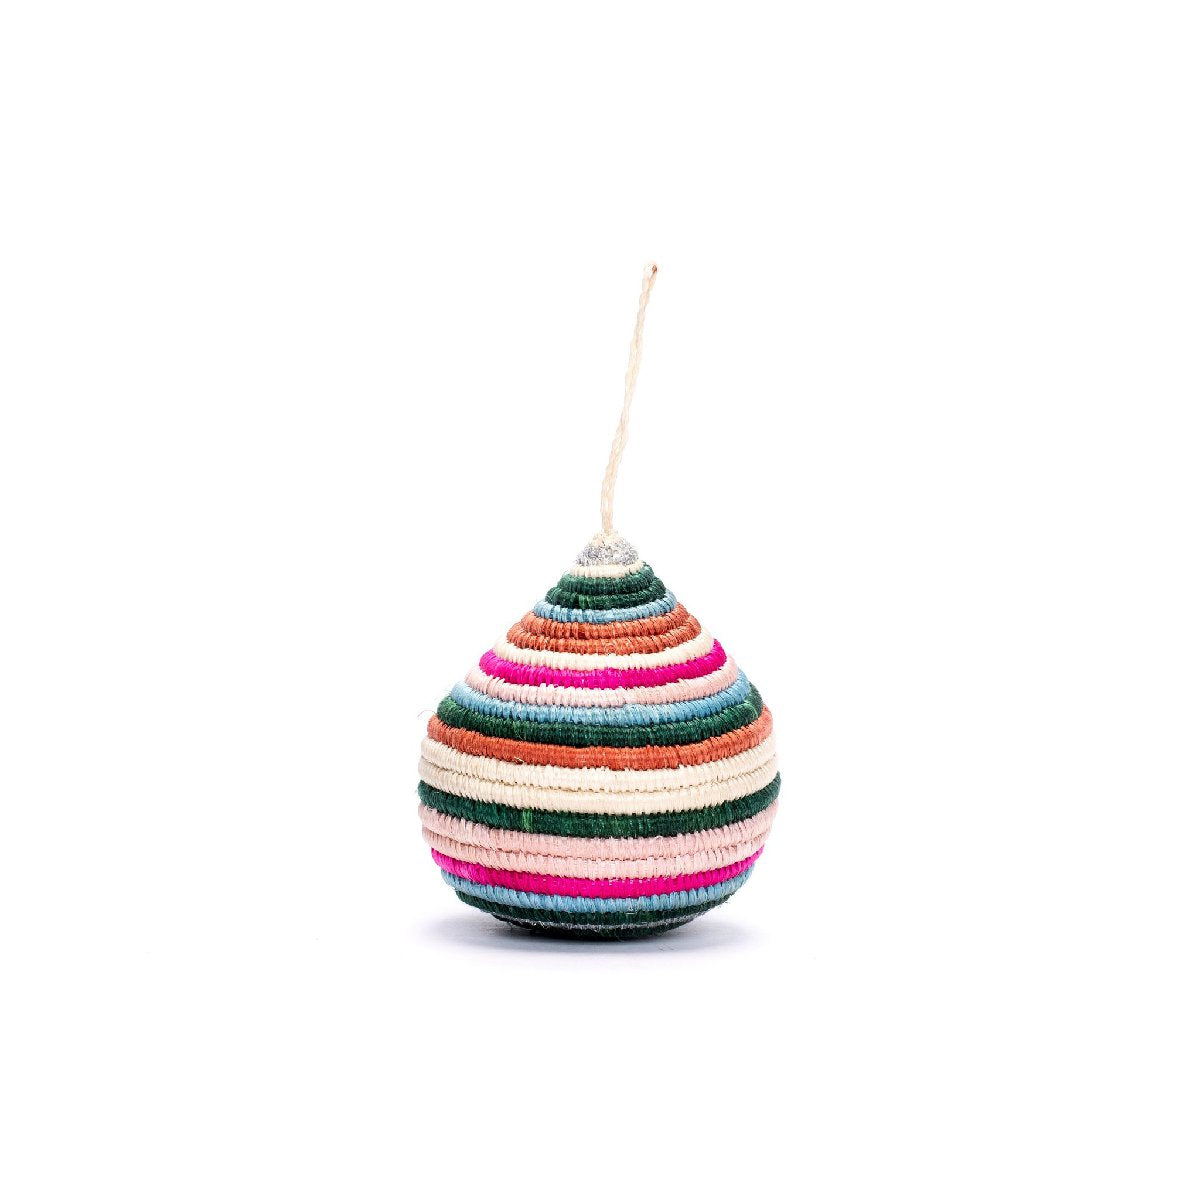 African woven bulb ornament | striped vivid